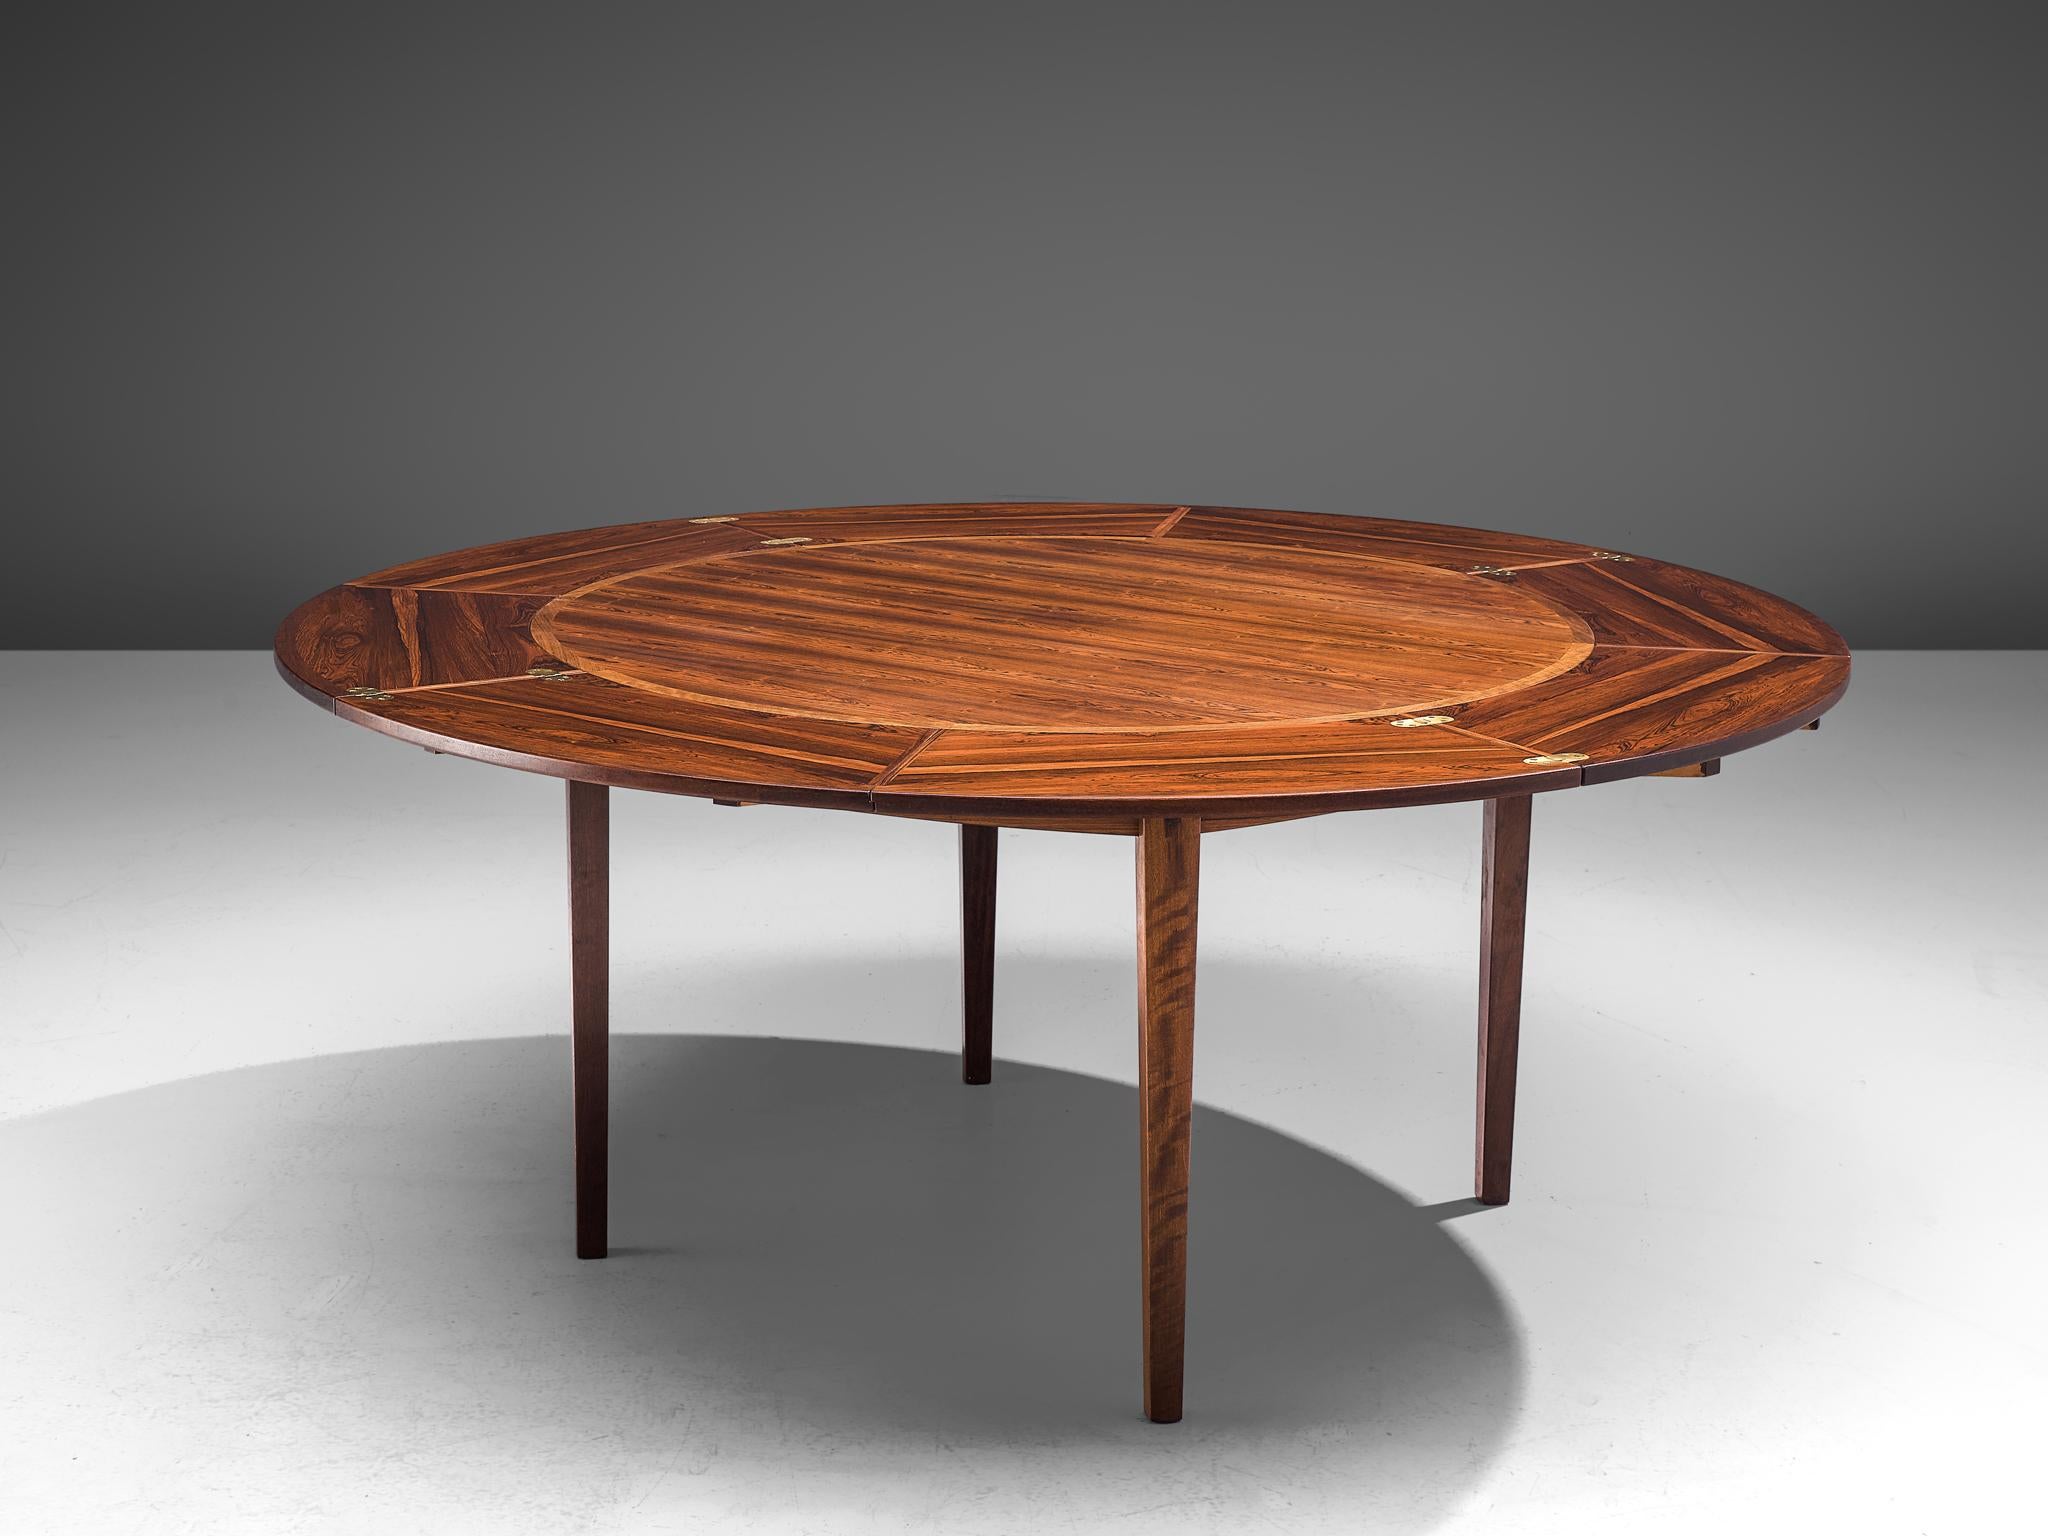 Dyrlund, round extendable dining table, rosewood and brass, Denmark, 1960s.

A circular, extendable table by Dyrlund made with beautiful rosewood, that shows dark flames. Besides the fact that this is a stunning piece, the table is also very